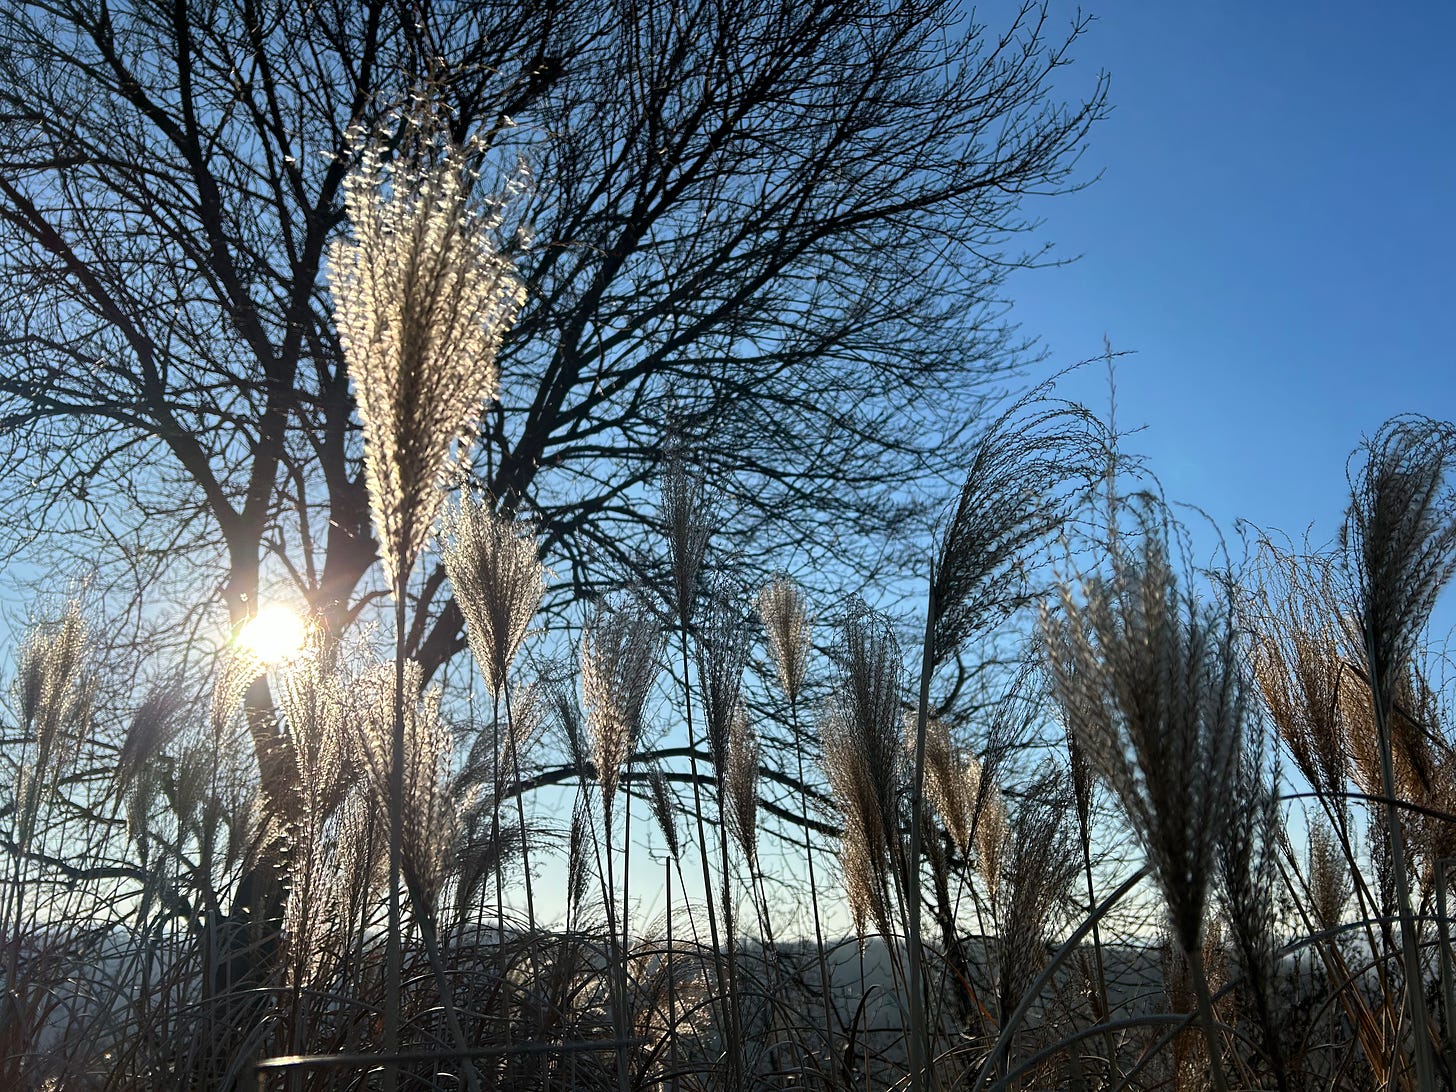 The sun shines through a patch of tall golden wheat husks, illuminated coldly against the bright blue winter sky.